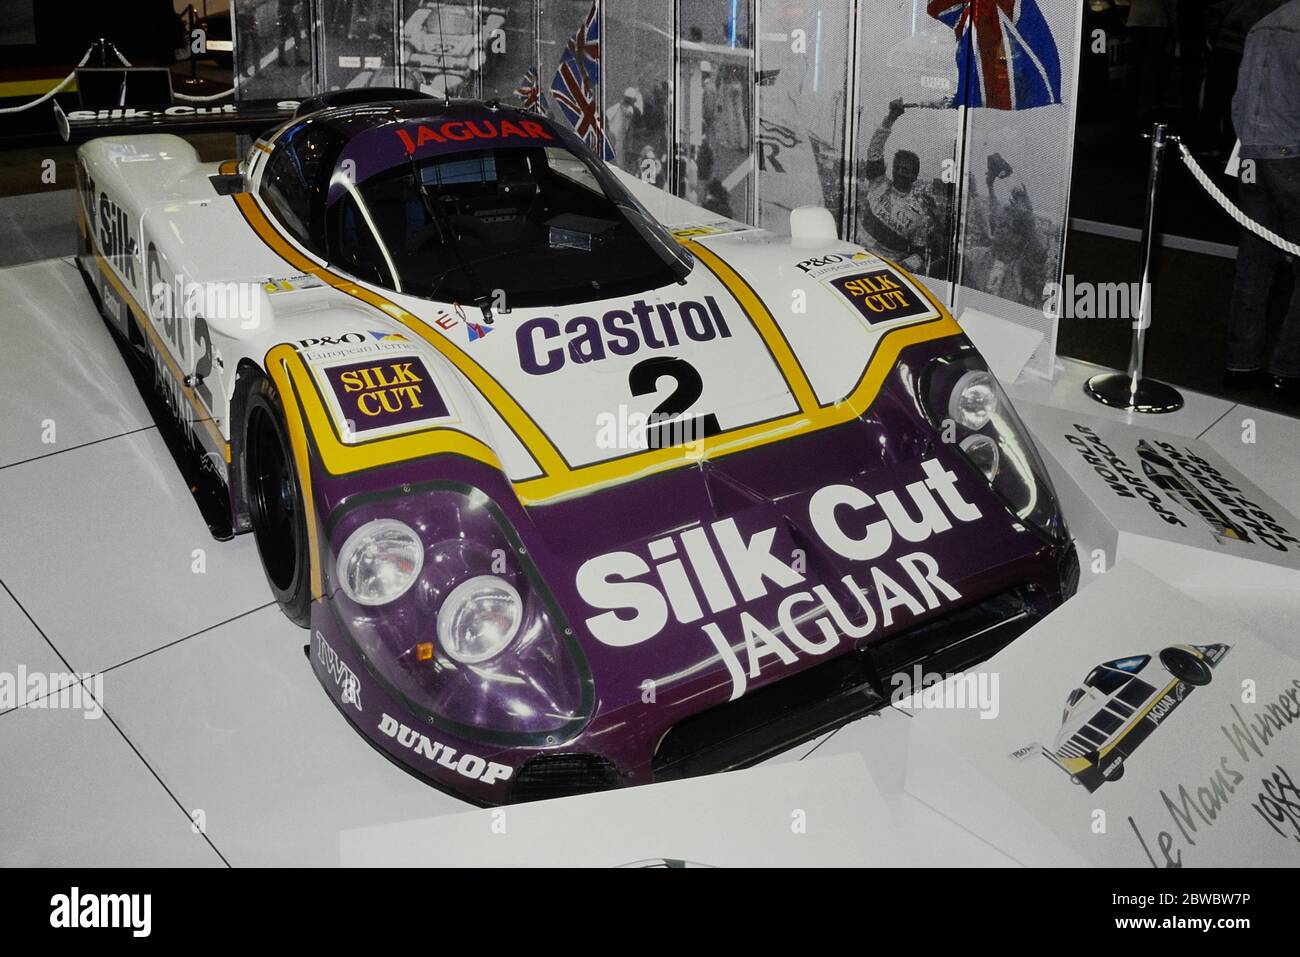 The 1988 24 hours of Le Mans winning Jaguar XJR-9 on display at THE RACING CAR SHOW 1989 SHOW. Olympia 2, London, England, UK, GB. 4-8th January 1989 Stock Photo